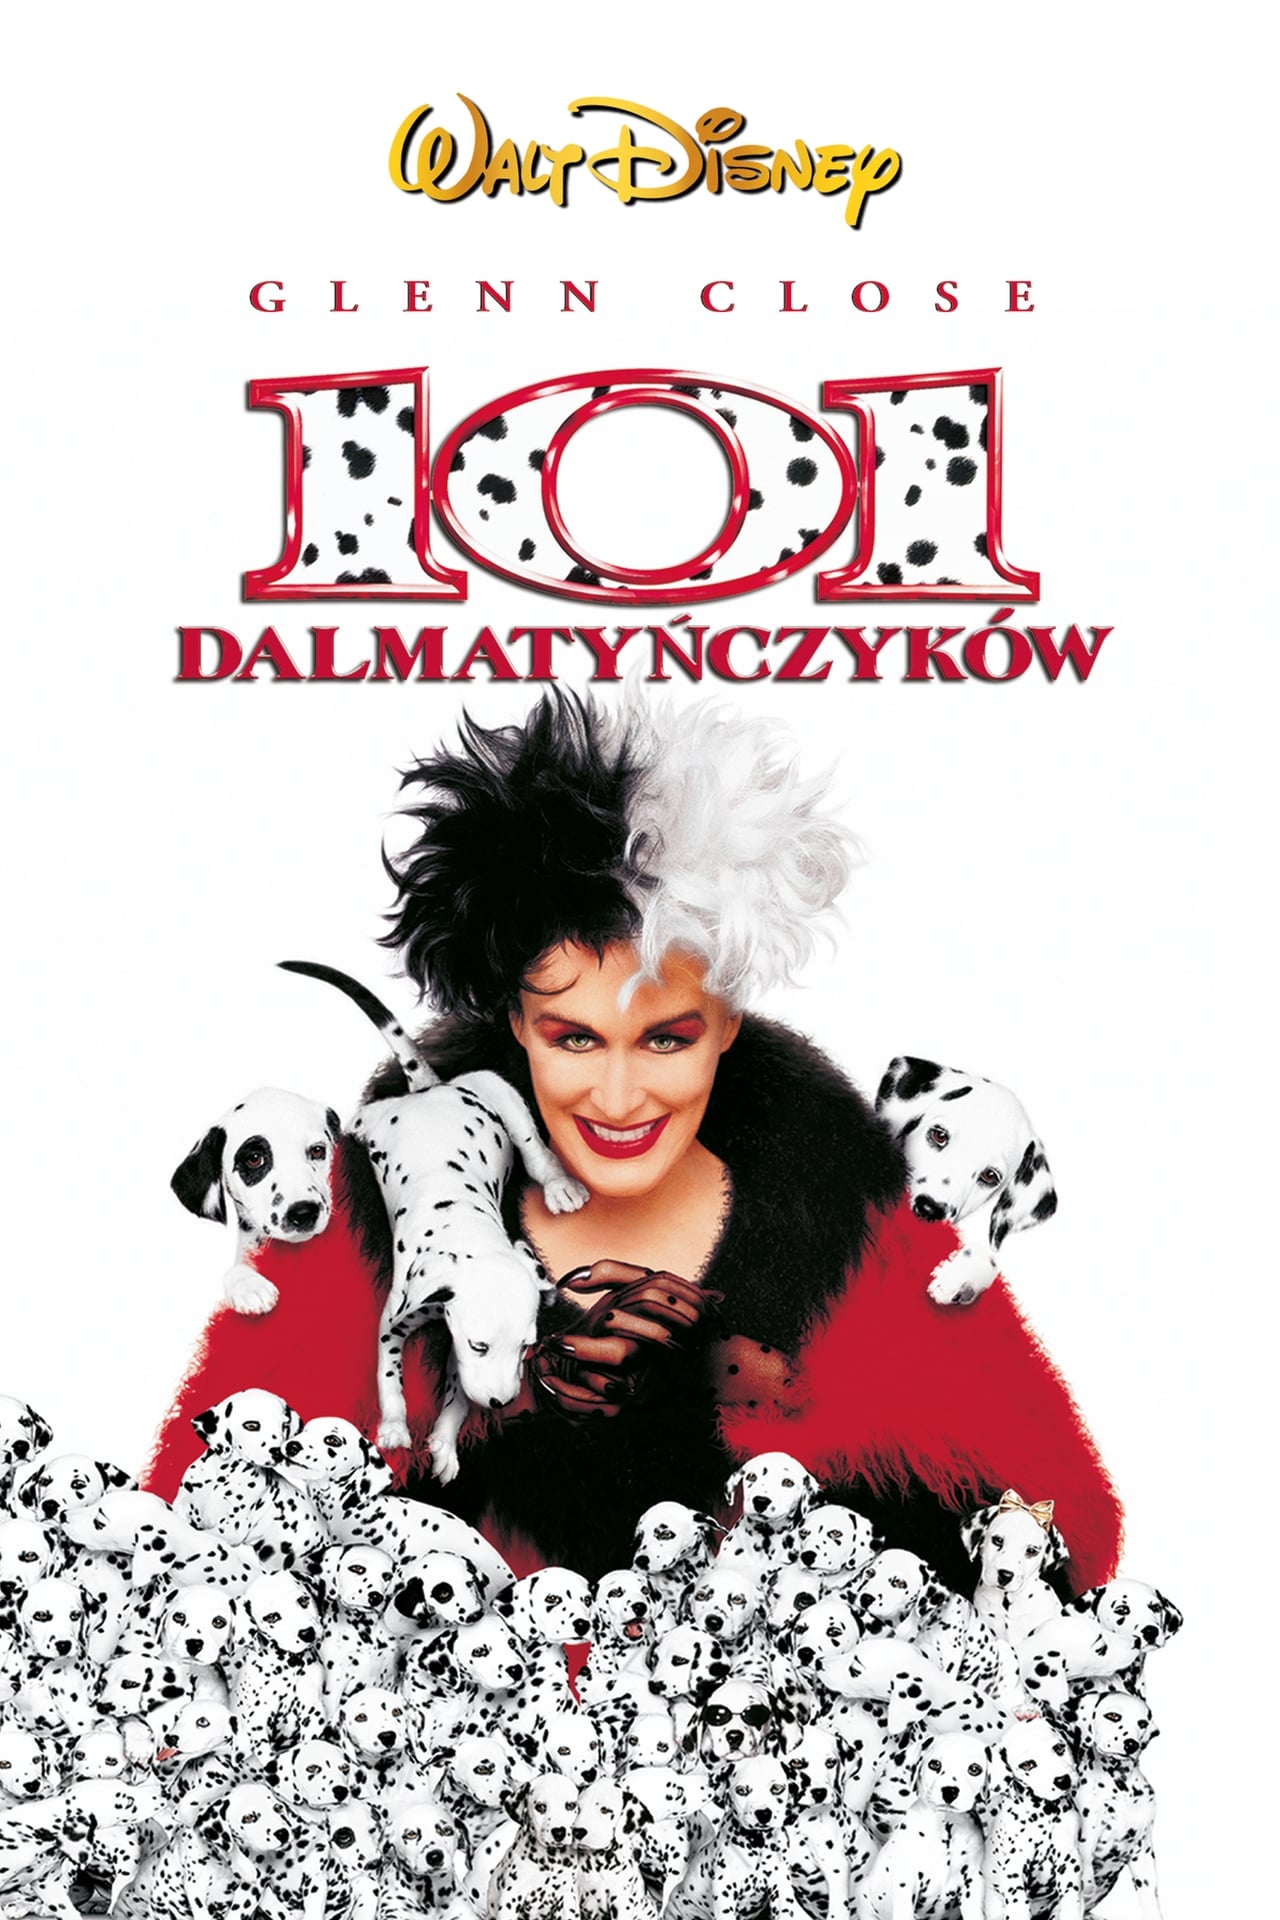 101 Dalmatians wiki, synopsis, reviews, watch and download